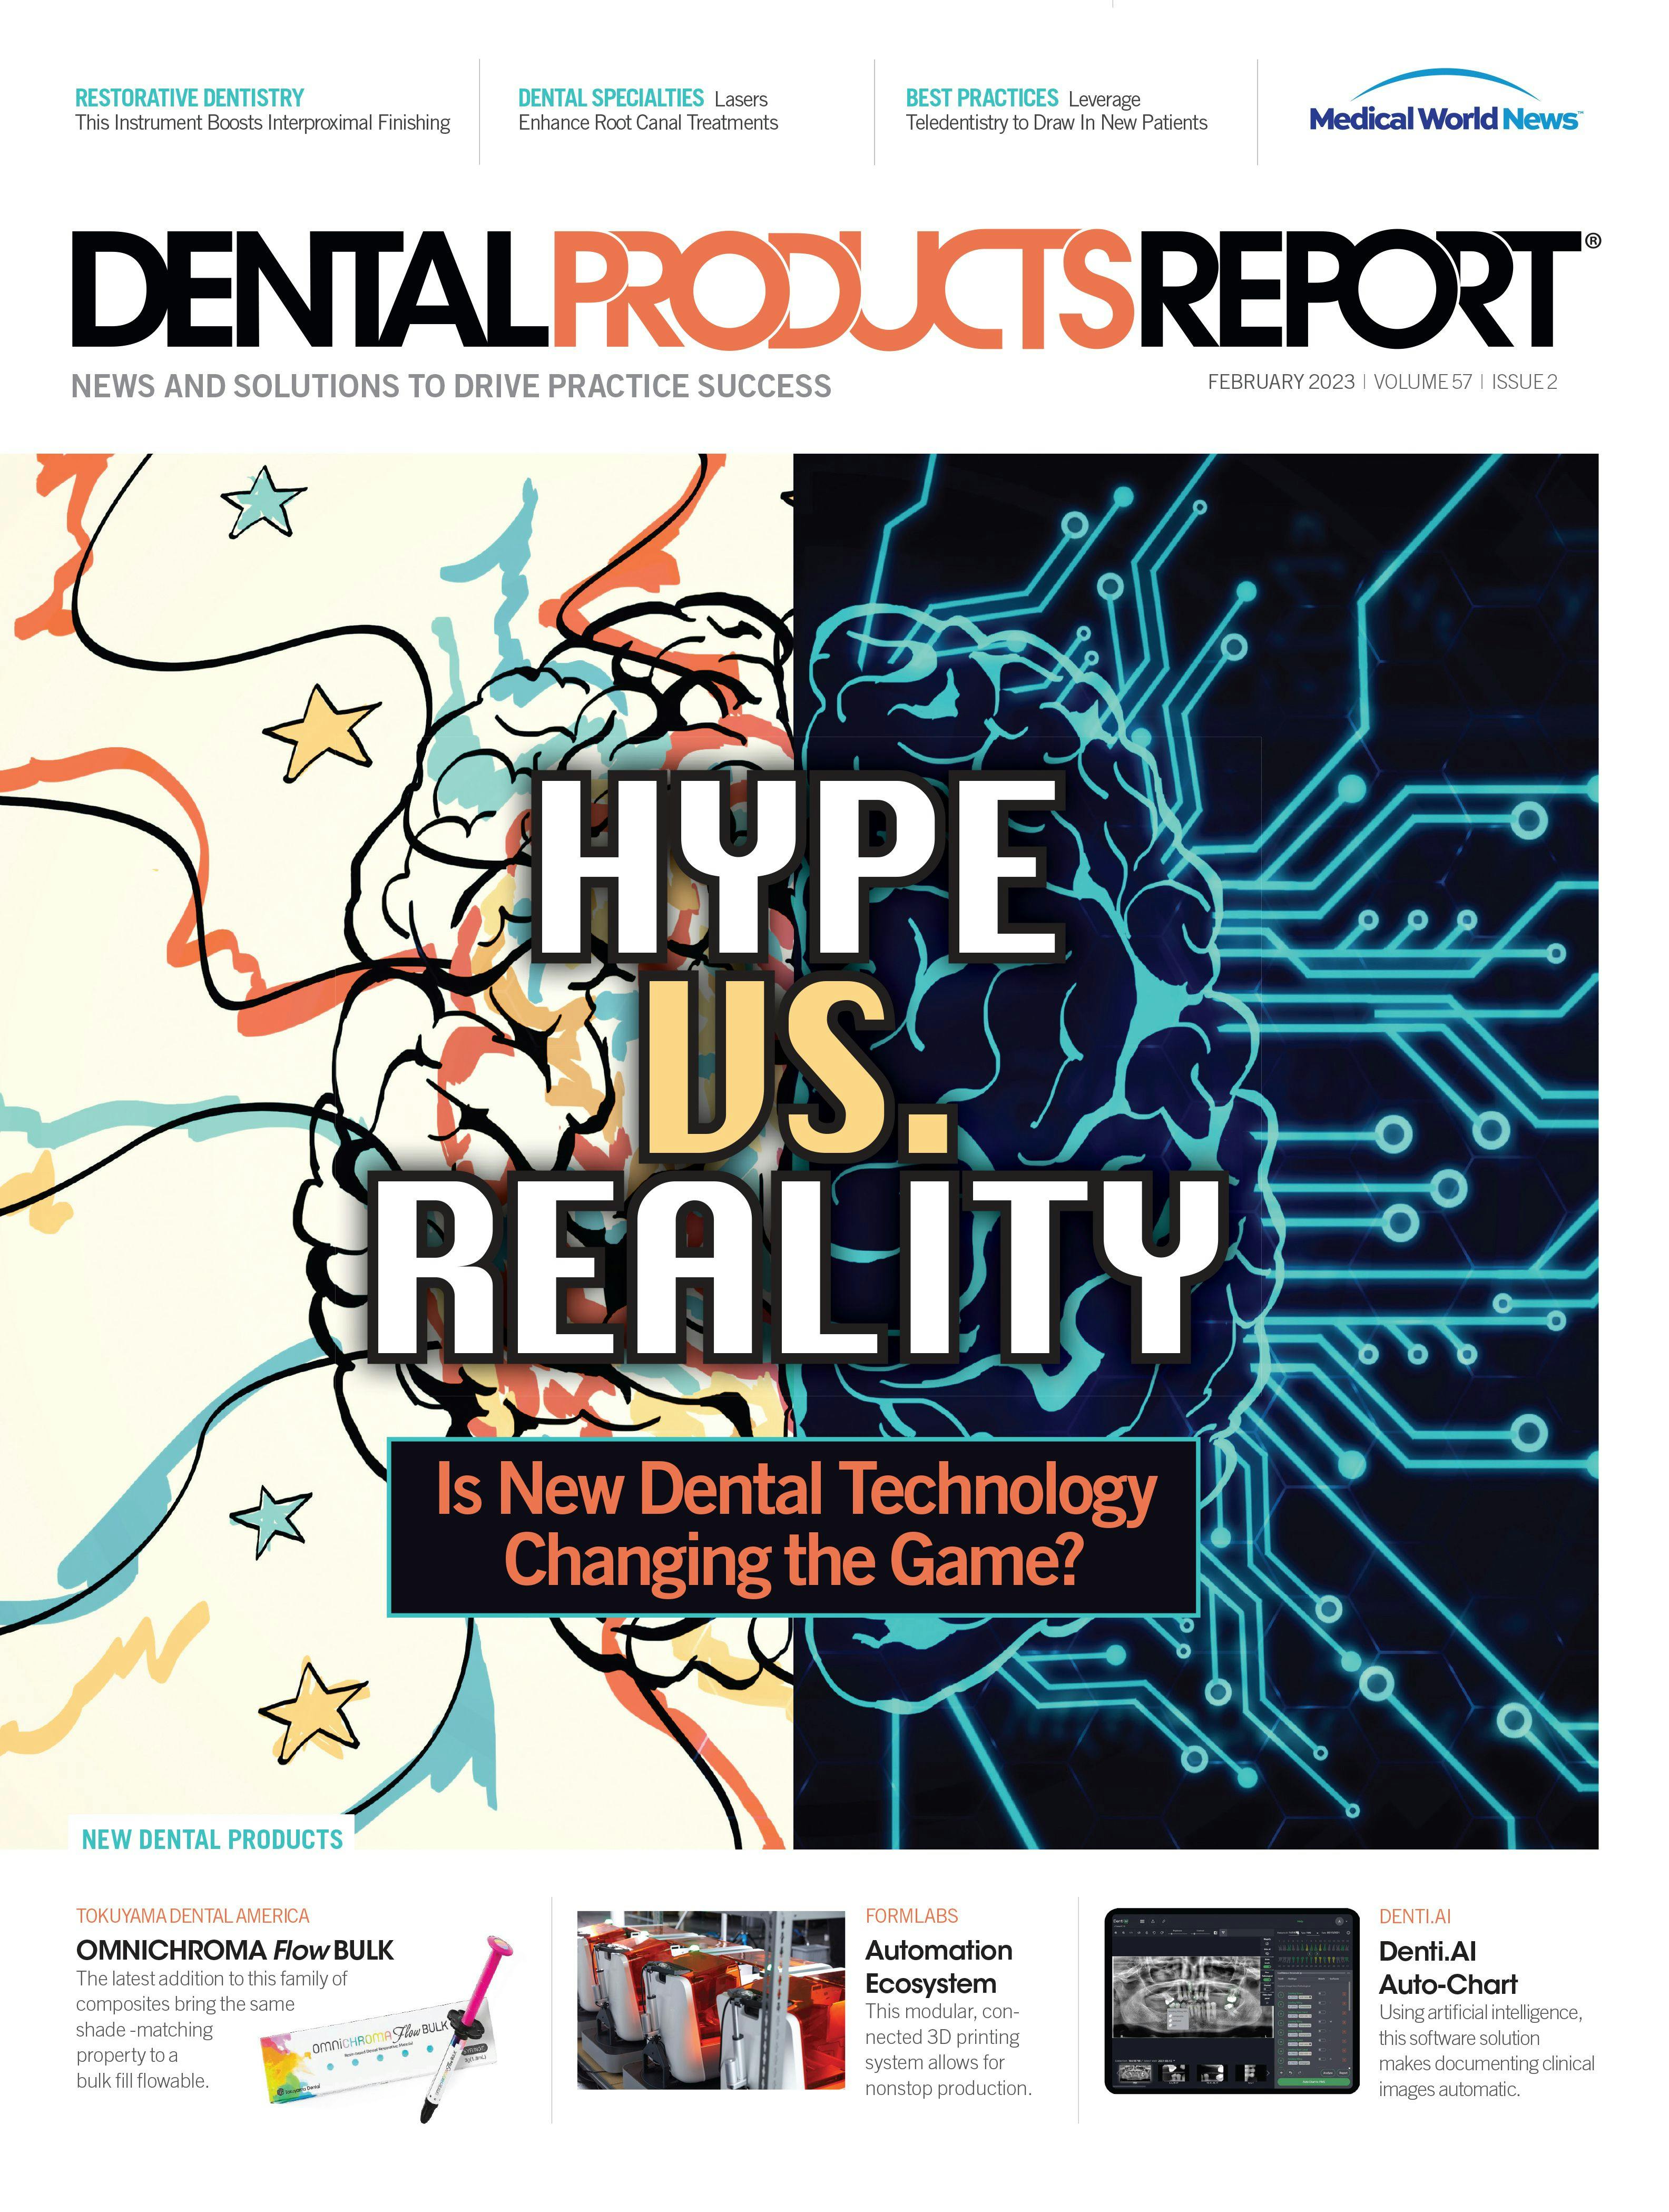 Dental Products Report February 2023 issue cover - Hype Vs. Reality - Is New Dental Technology Changing the Game?